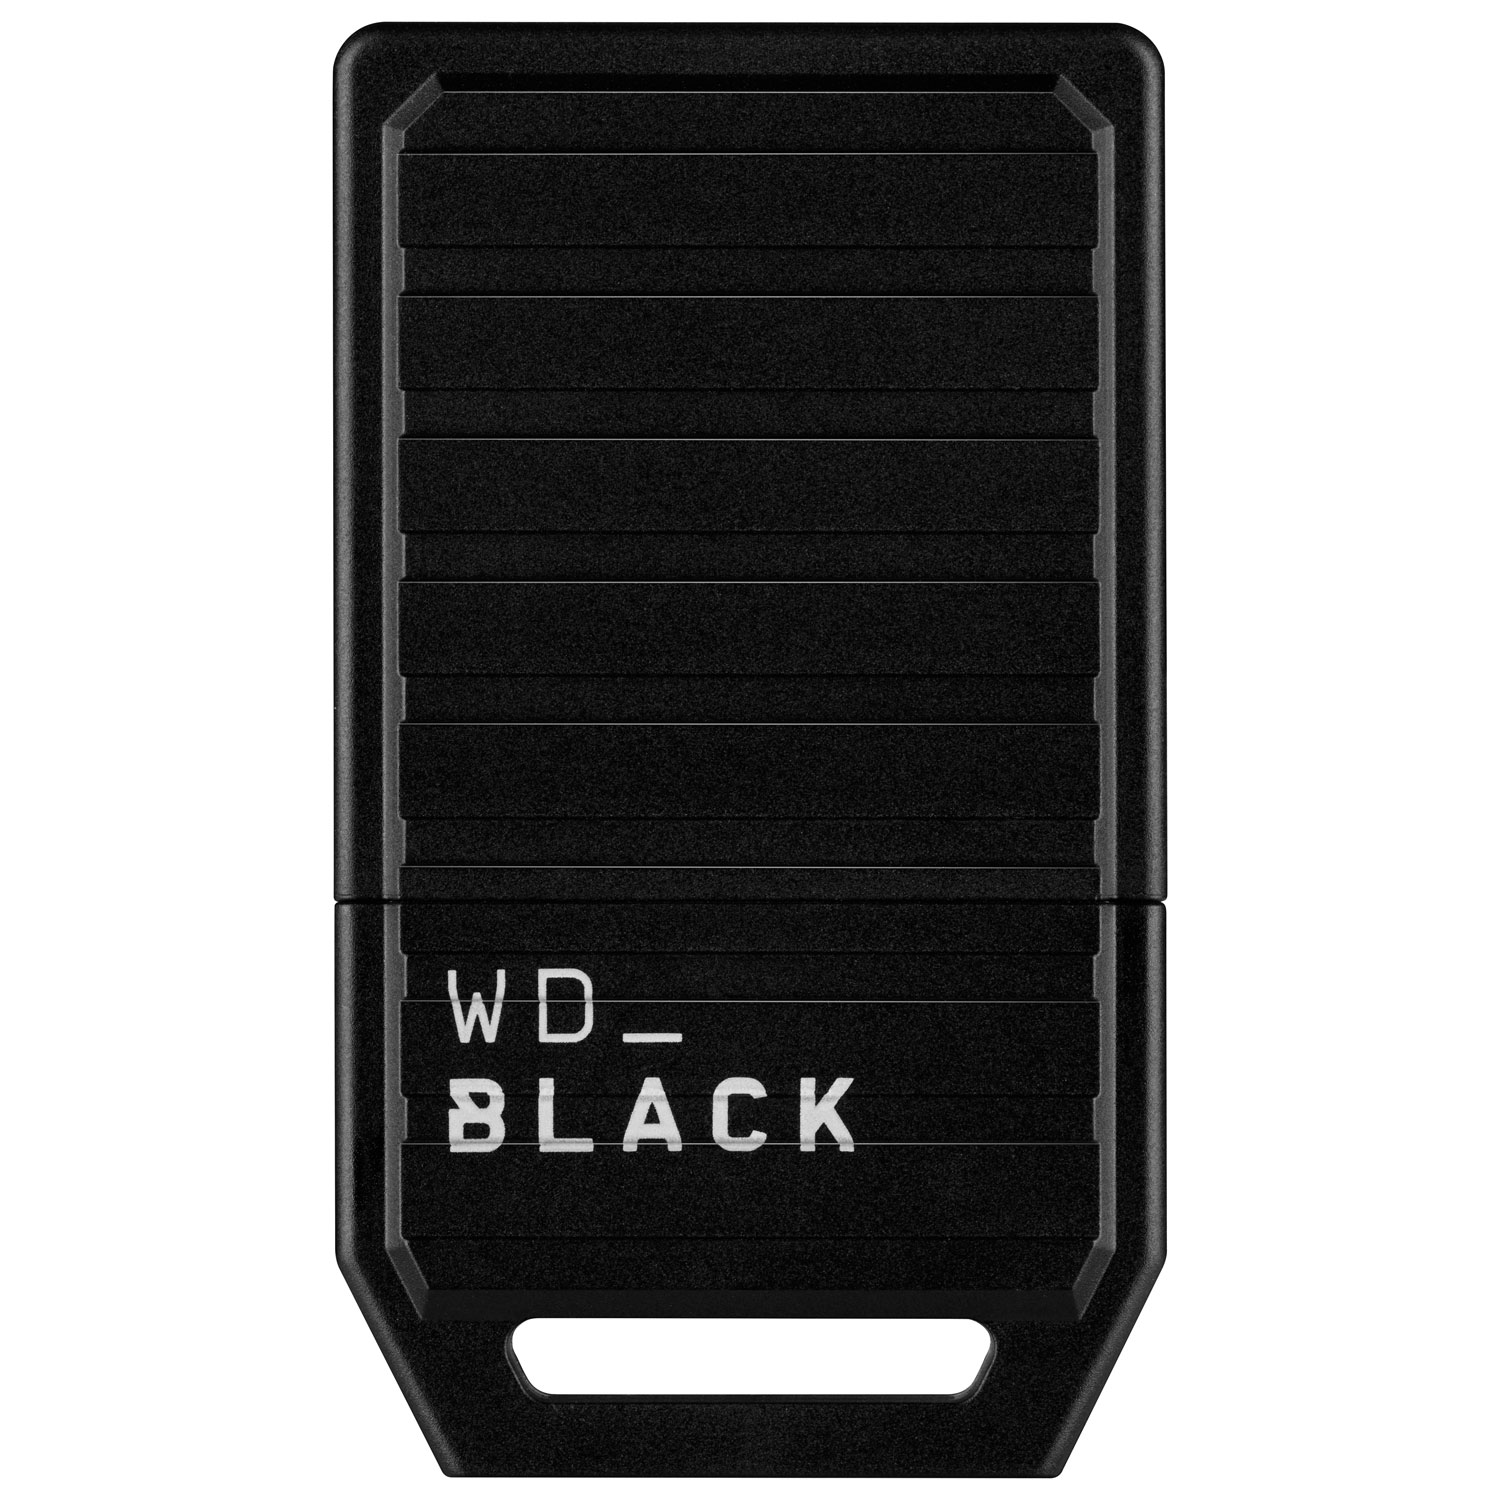 WD_BLACK C50 1TB Expansion Card - Officially Licensed for Xbox Series X|S